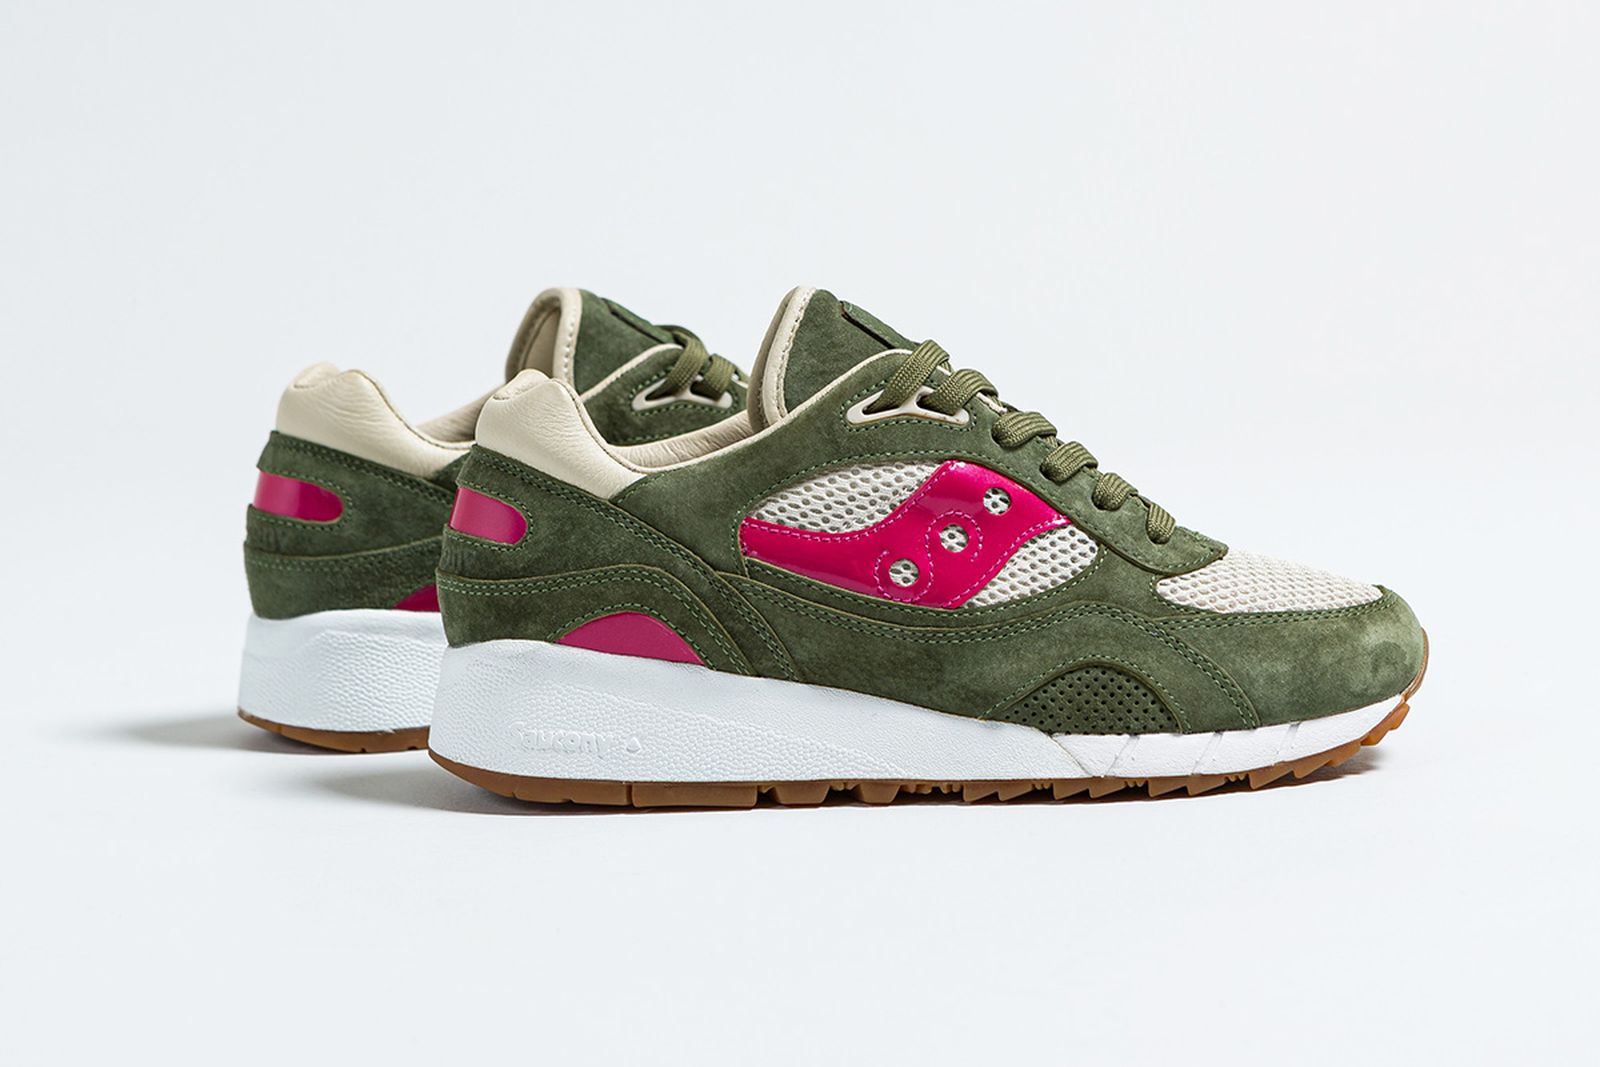 up-there-saucony-shadow-6000-release-date-price-01